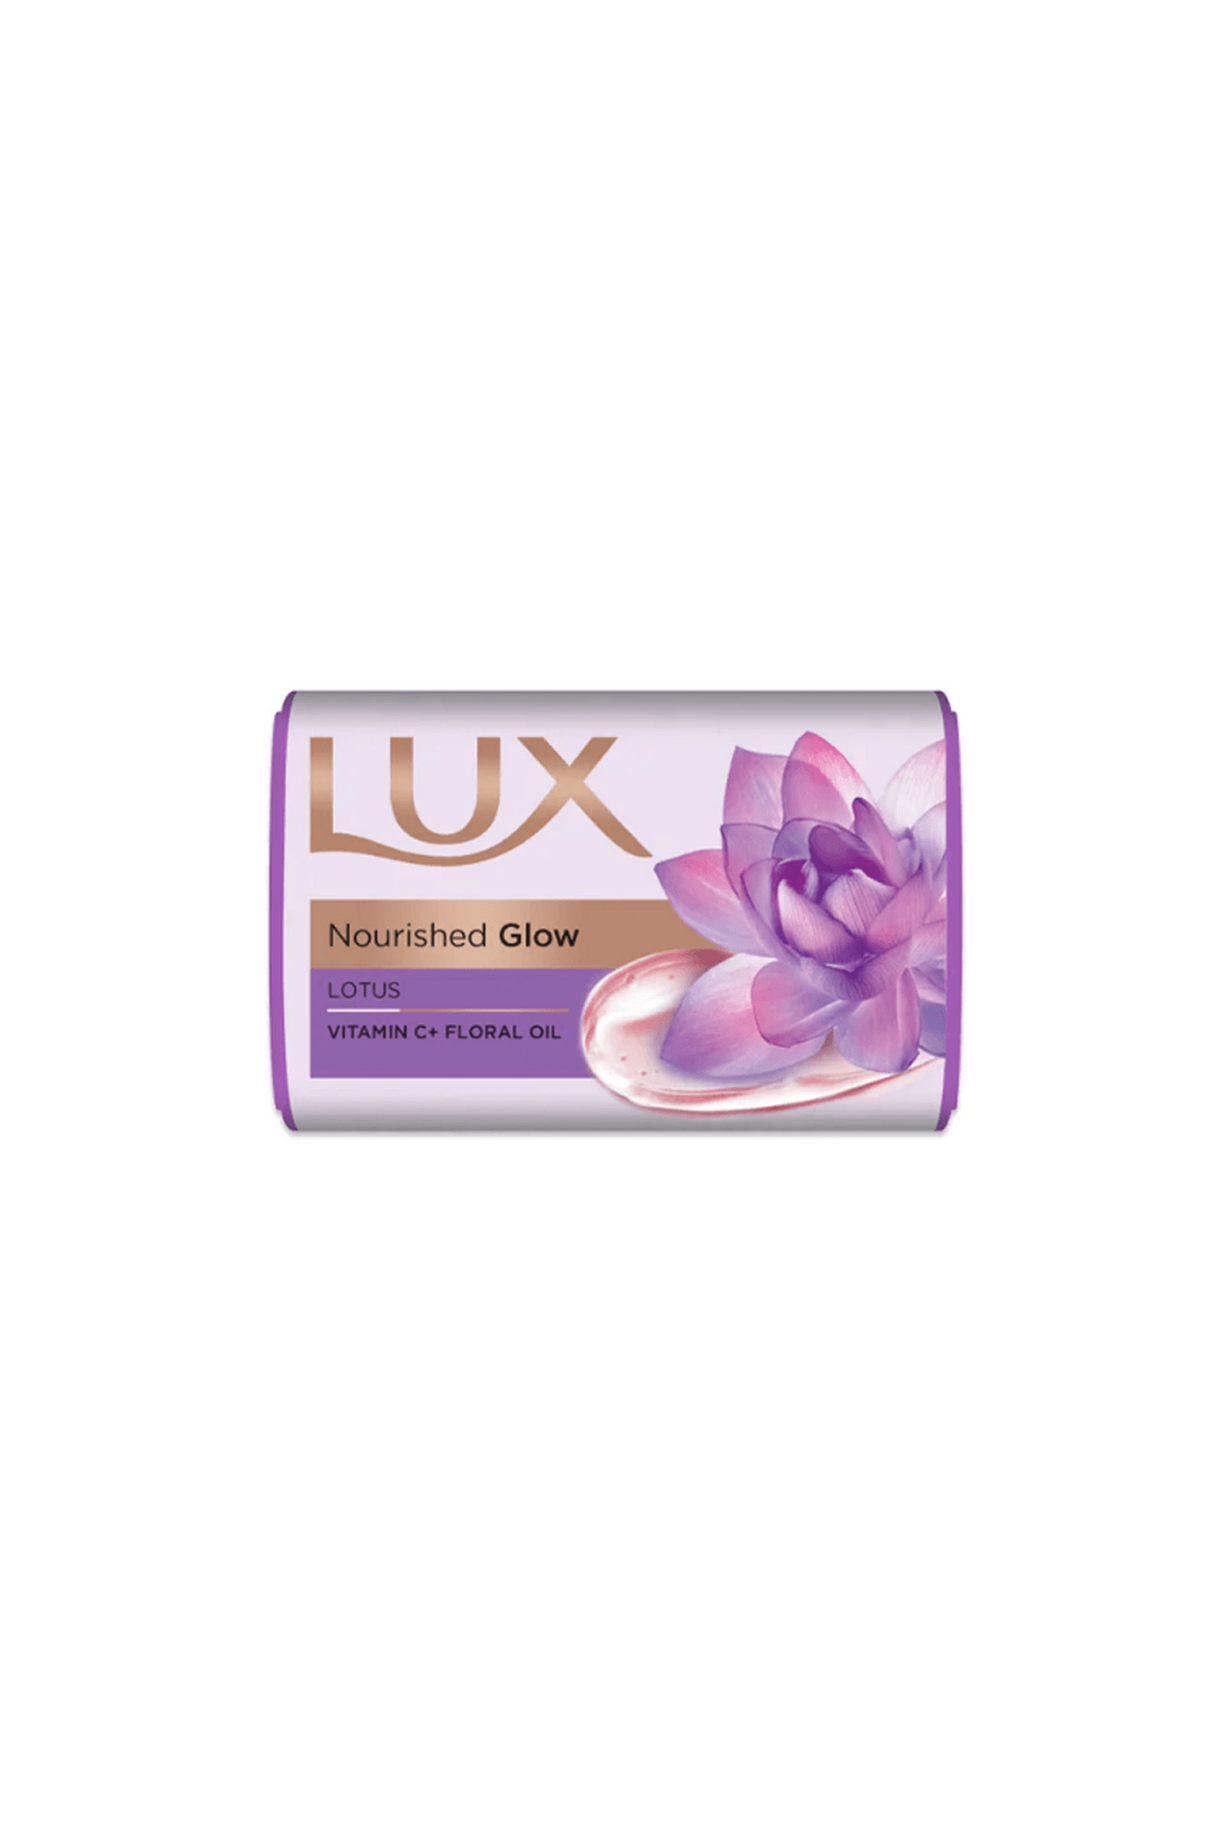 lux soap nourished glow 172g